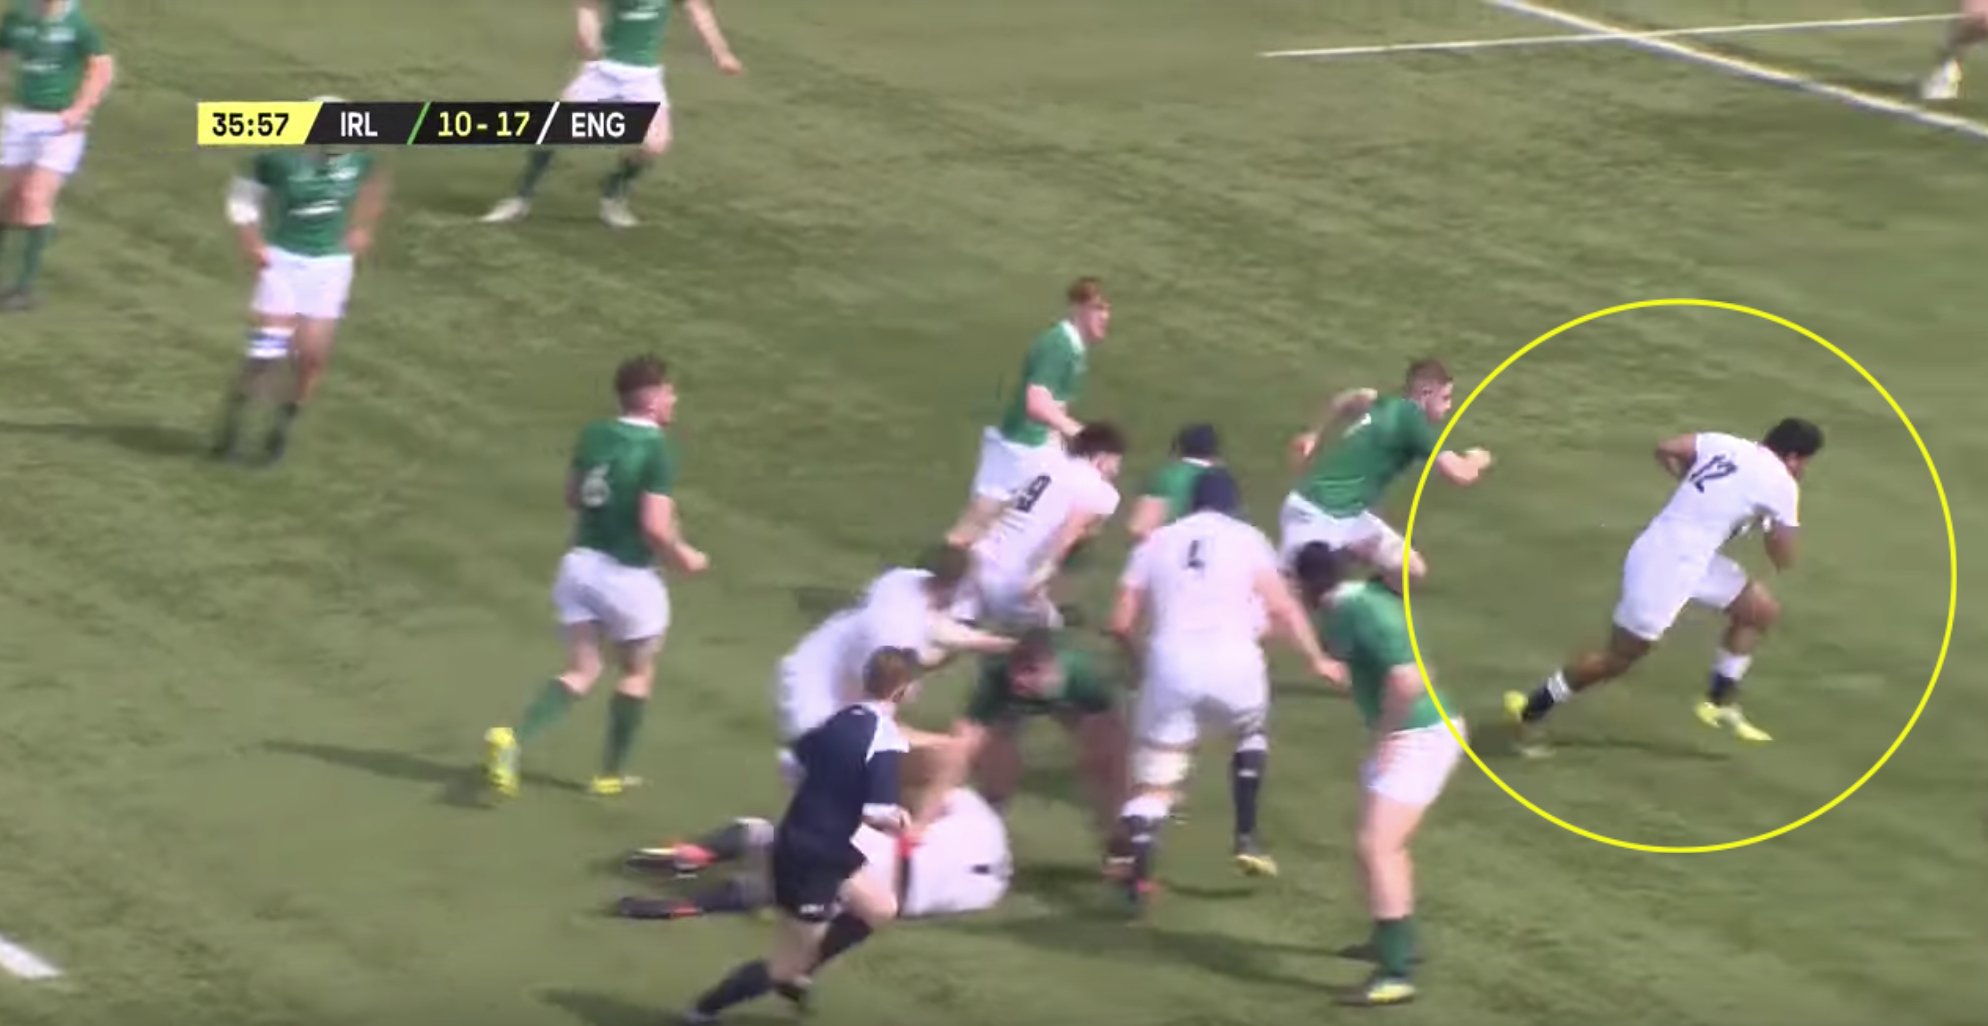 WATCH: Joe Cokanasiga's brother is ruining lives for the England Under 18's